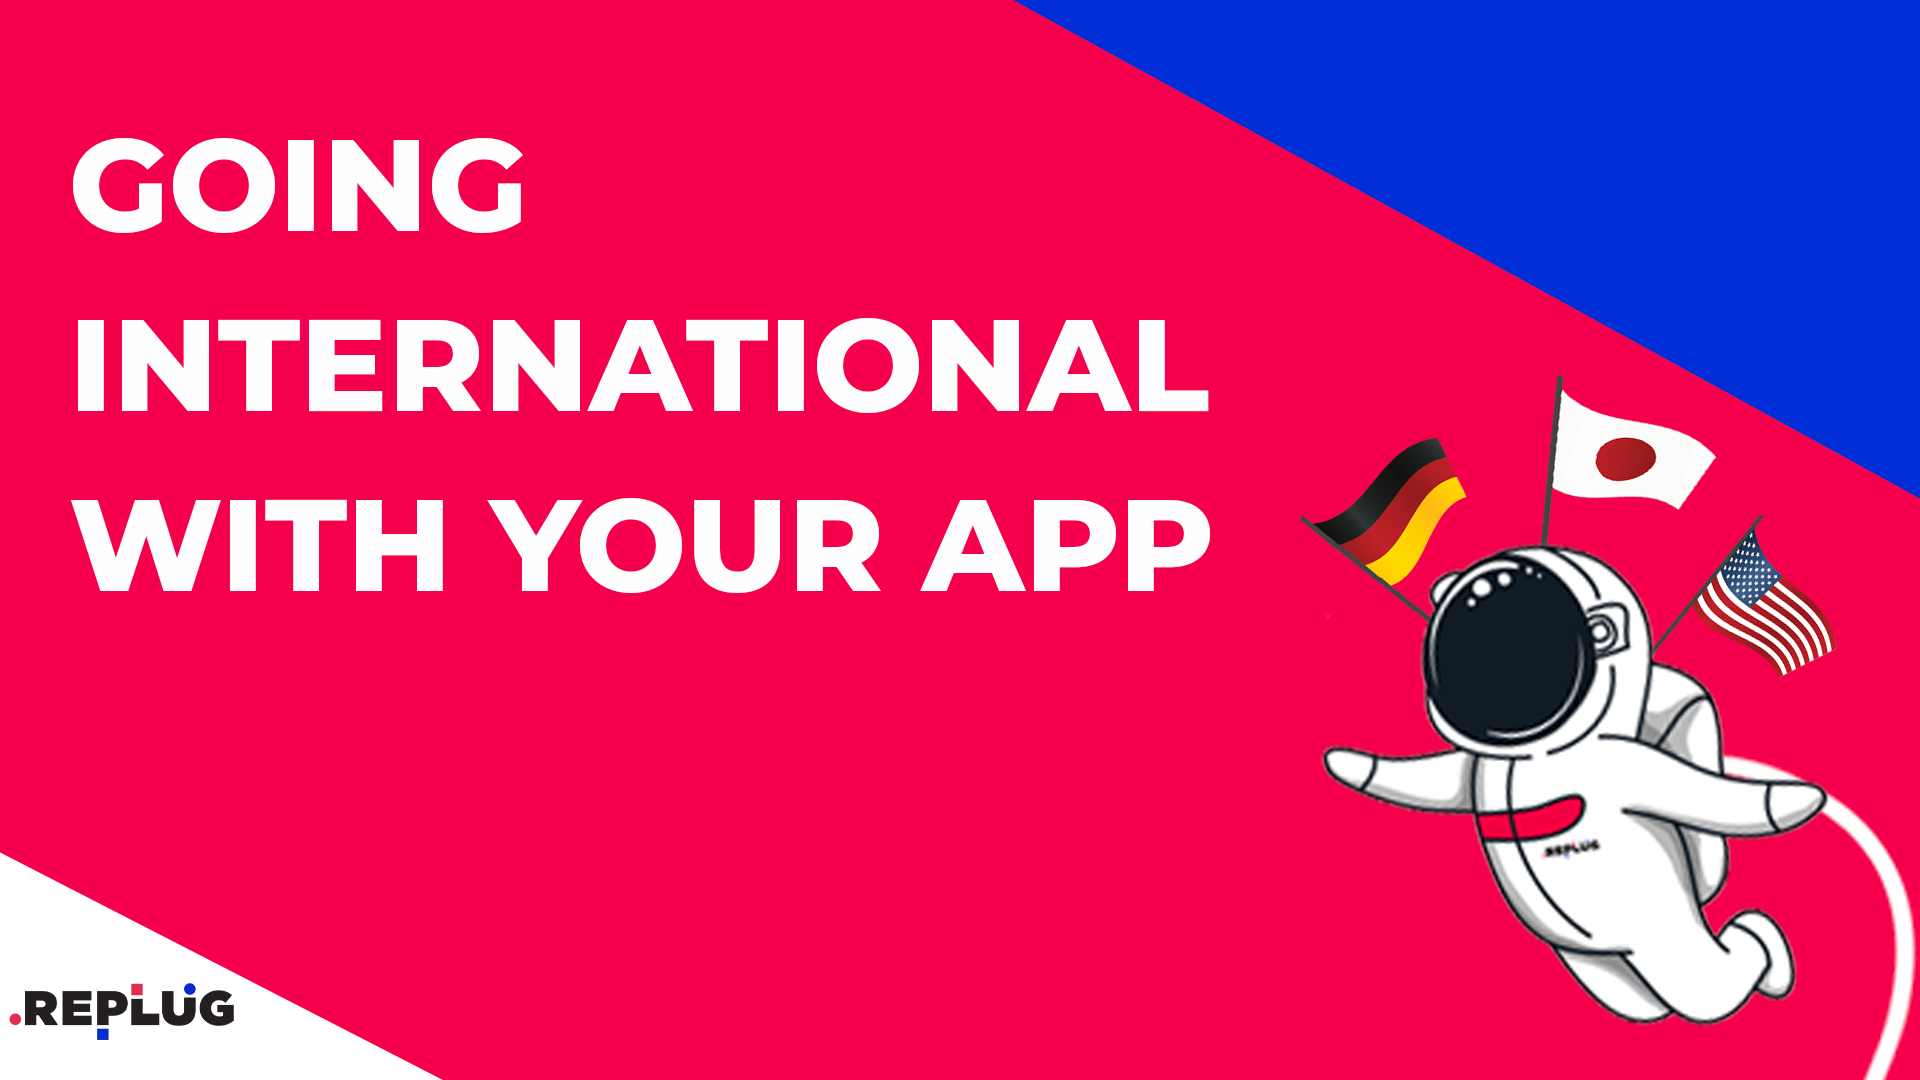 Going International with your app